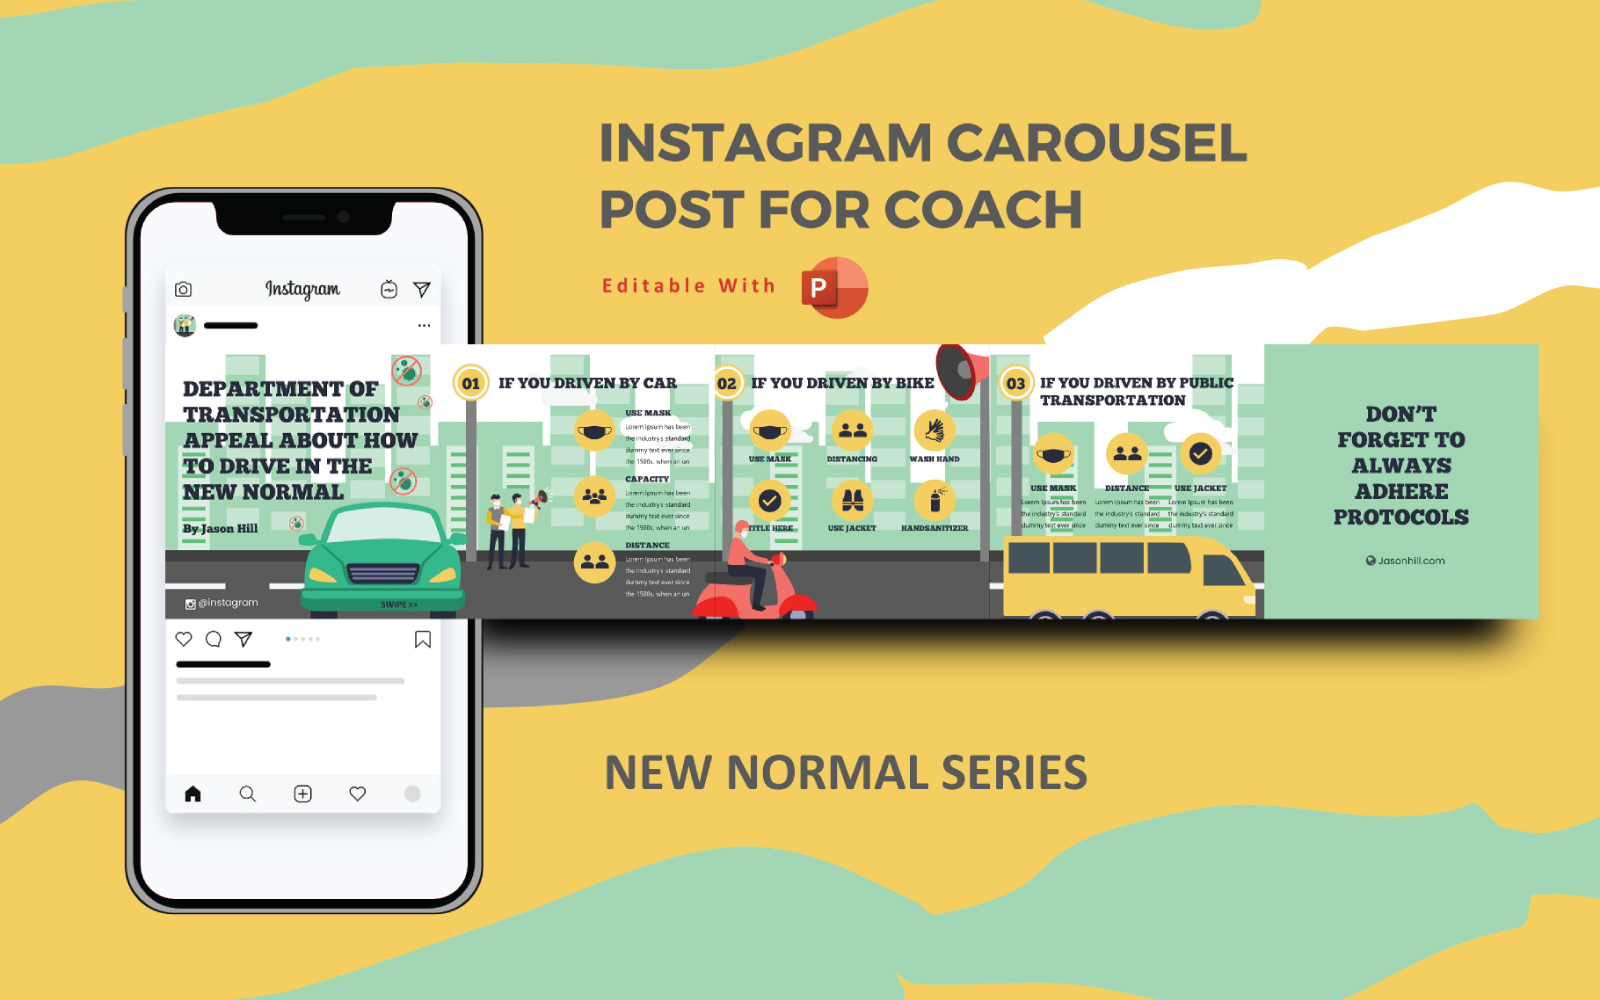 How to Drive in The New Normal - Instagram Carousel Powerpoint